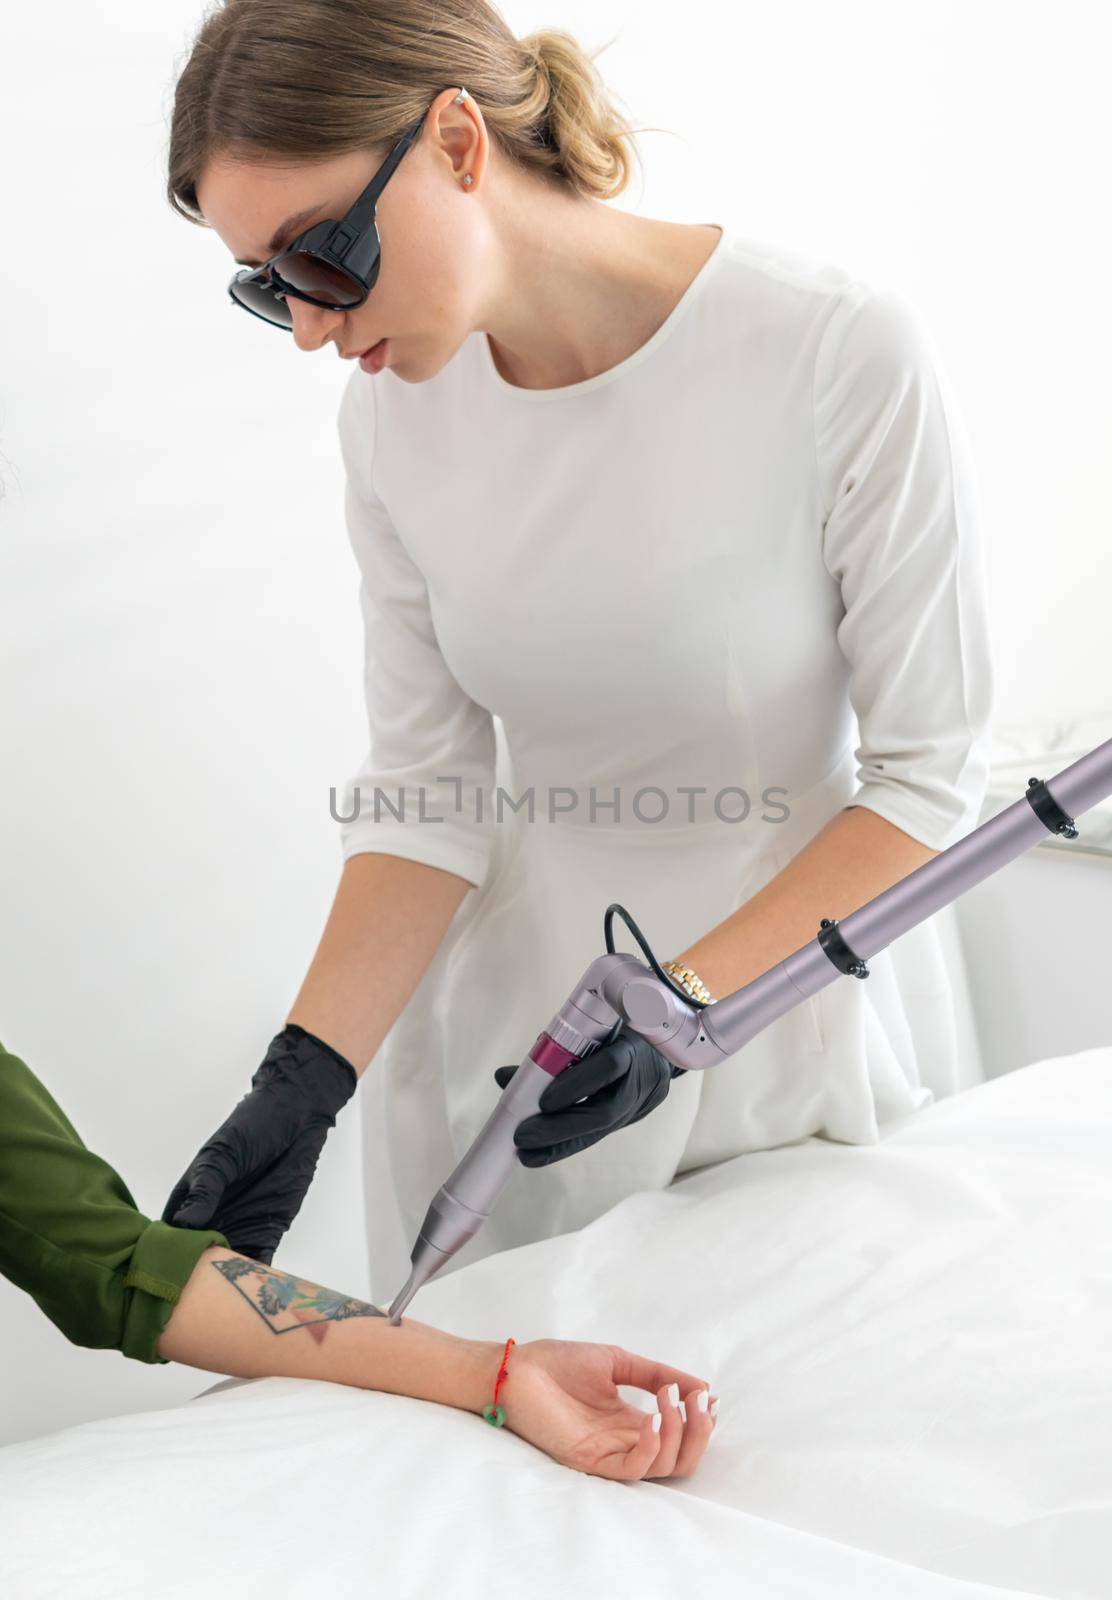 Cosmetologist removing tattoo with laser device female hand. Concept of erasing tattoos as an expensive procedure in cosmetology clinic by Mariakray